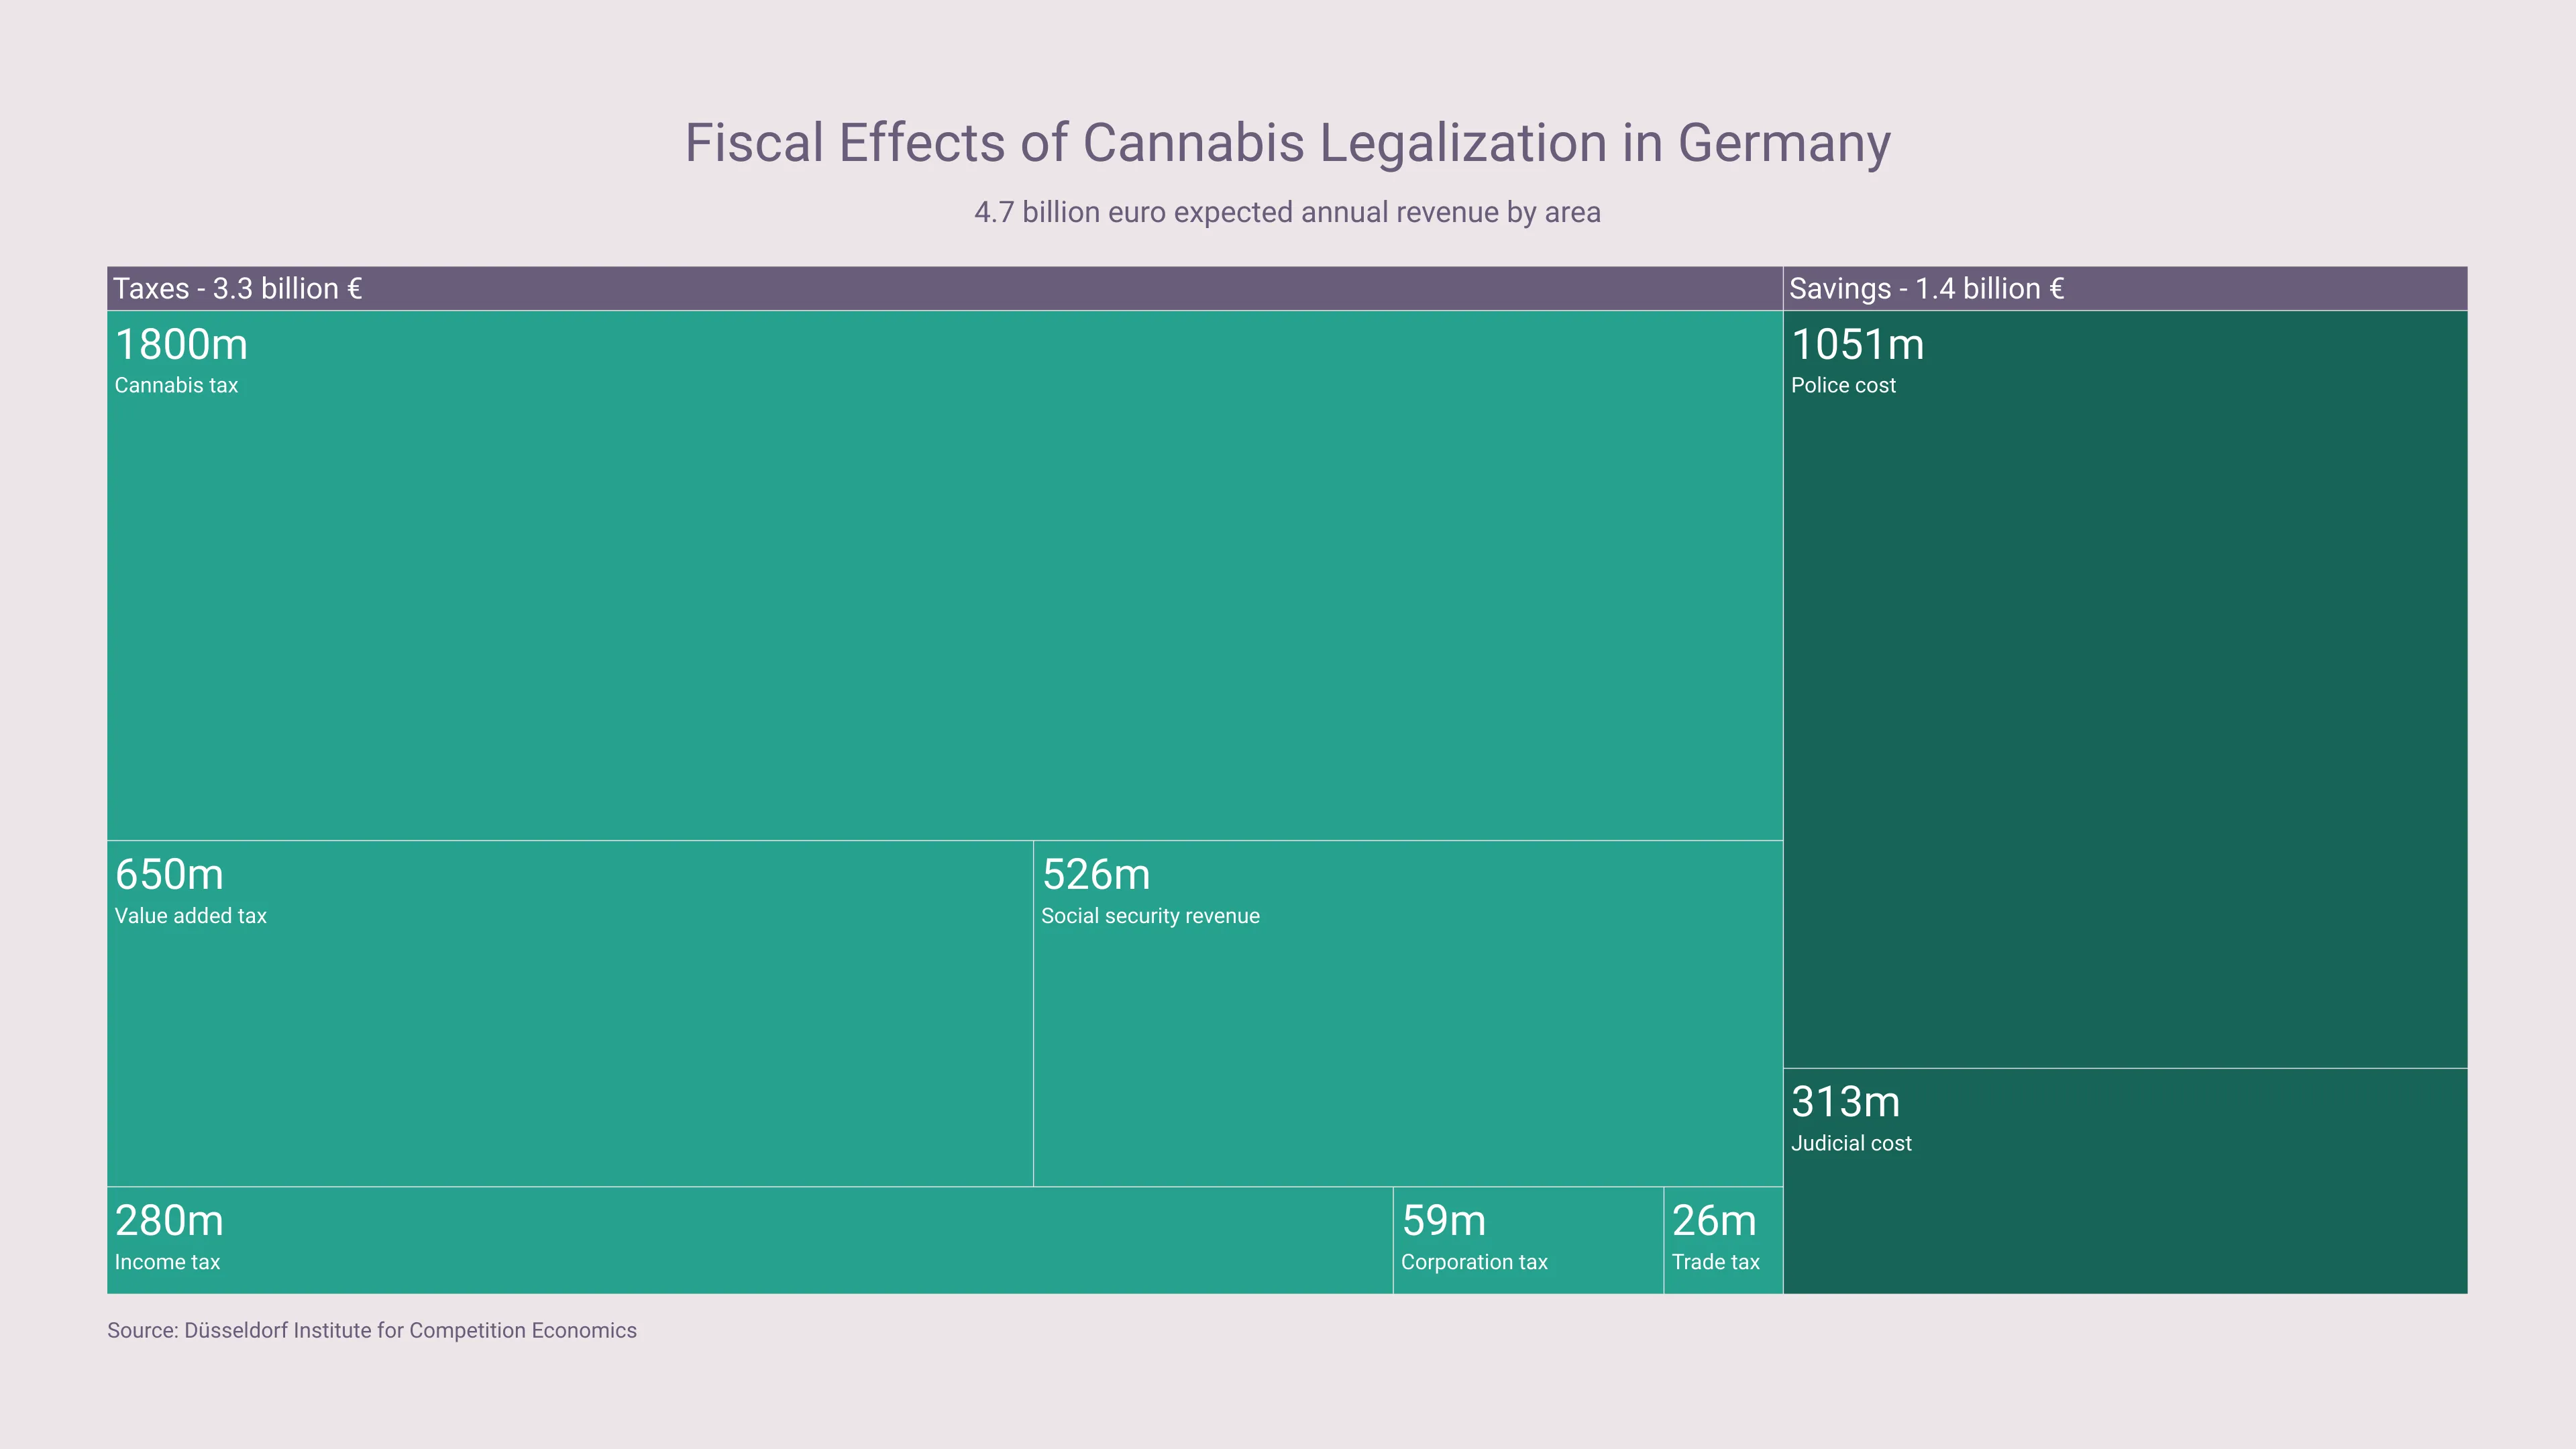 Fiscal Effects of Cannabis Legalization in Germany